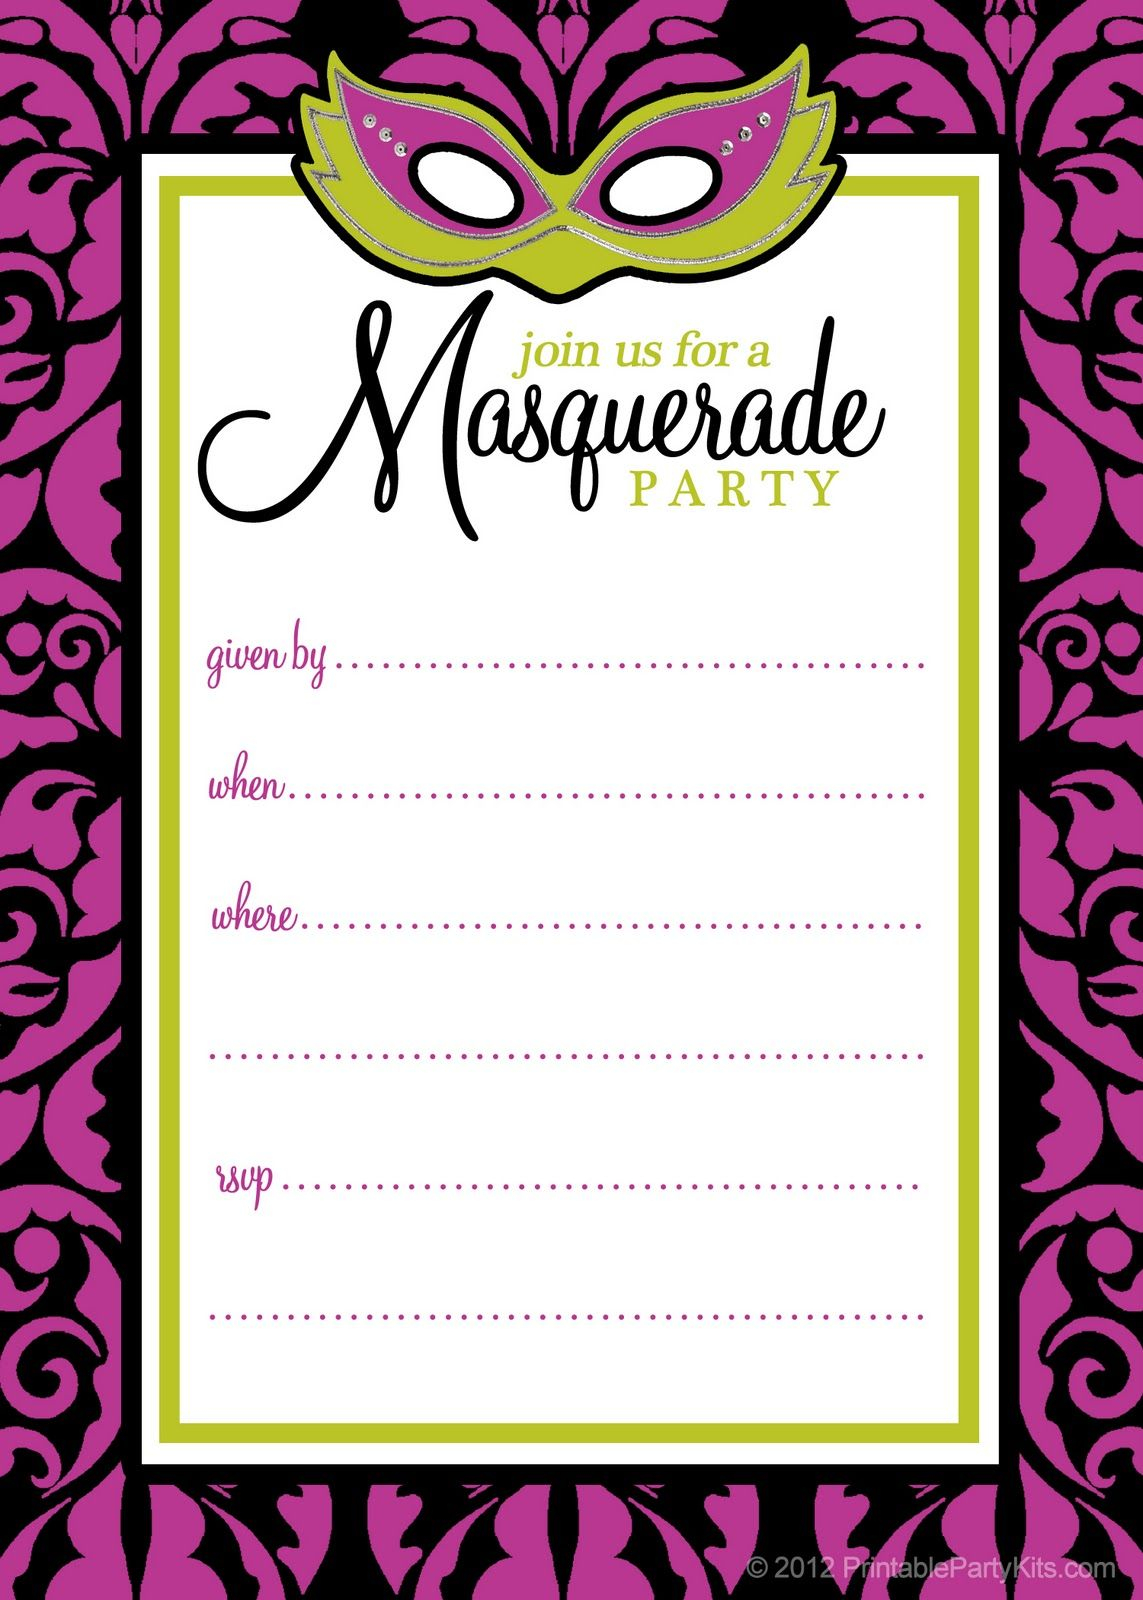 Free Printable Party Invitations Masquerade Or Mardi Gras Party within proportions 1143 X 1600